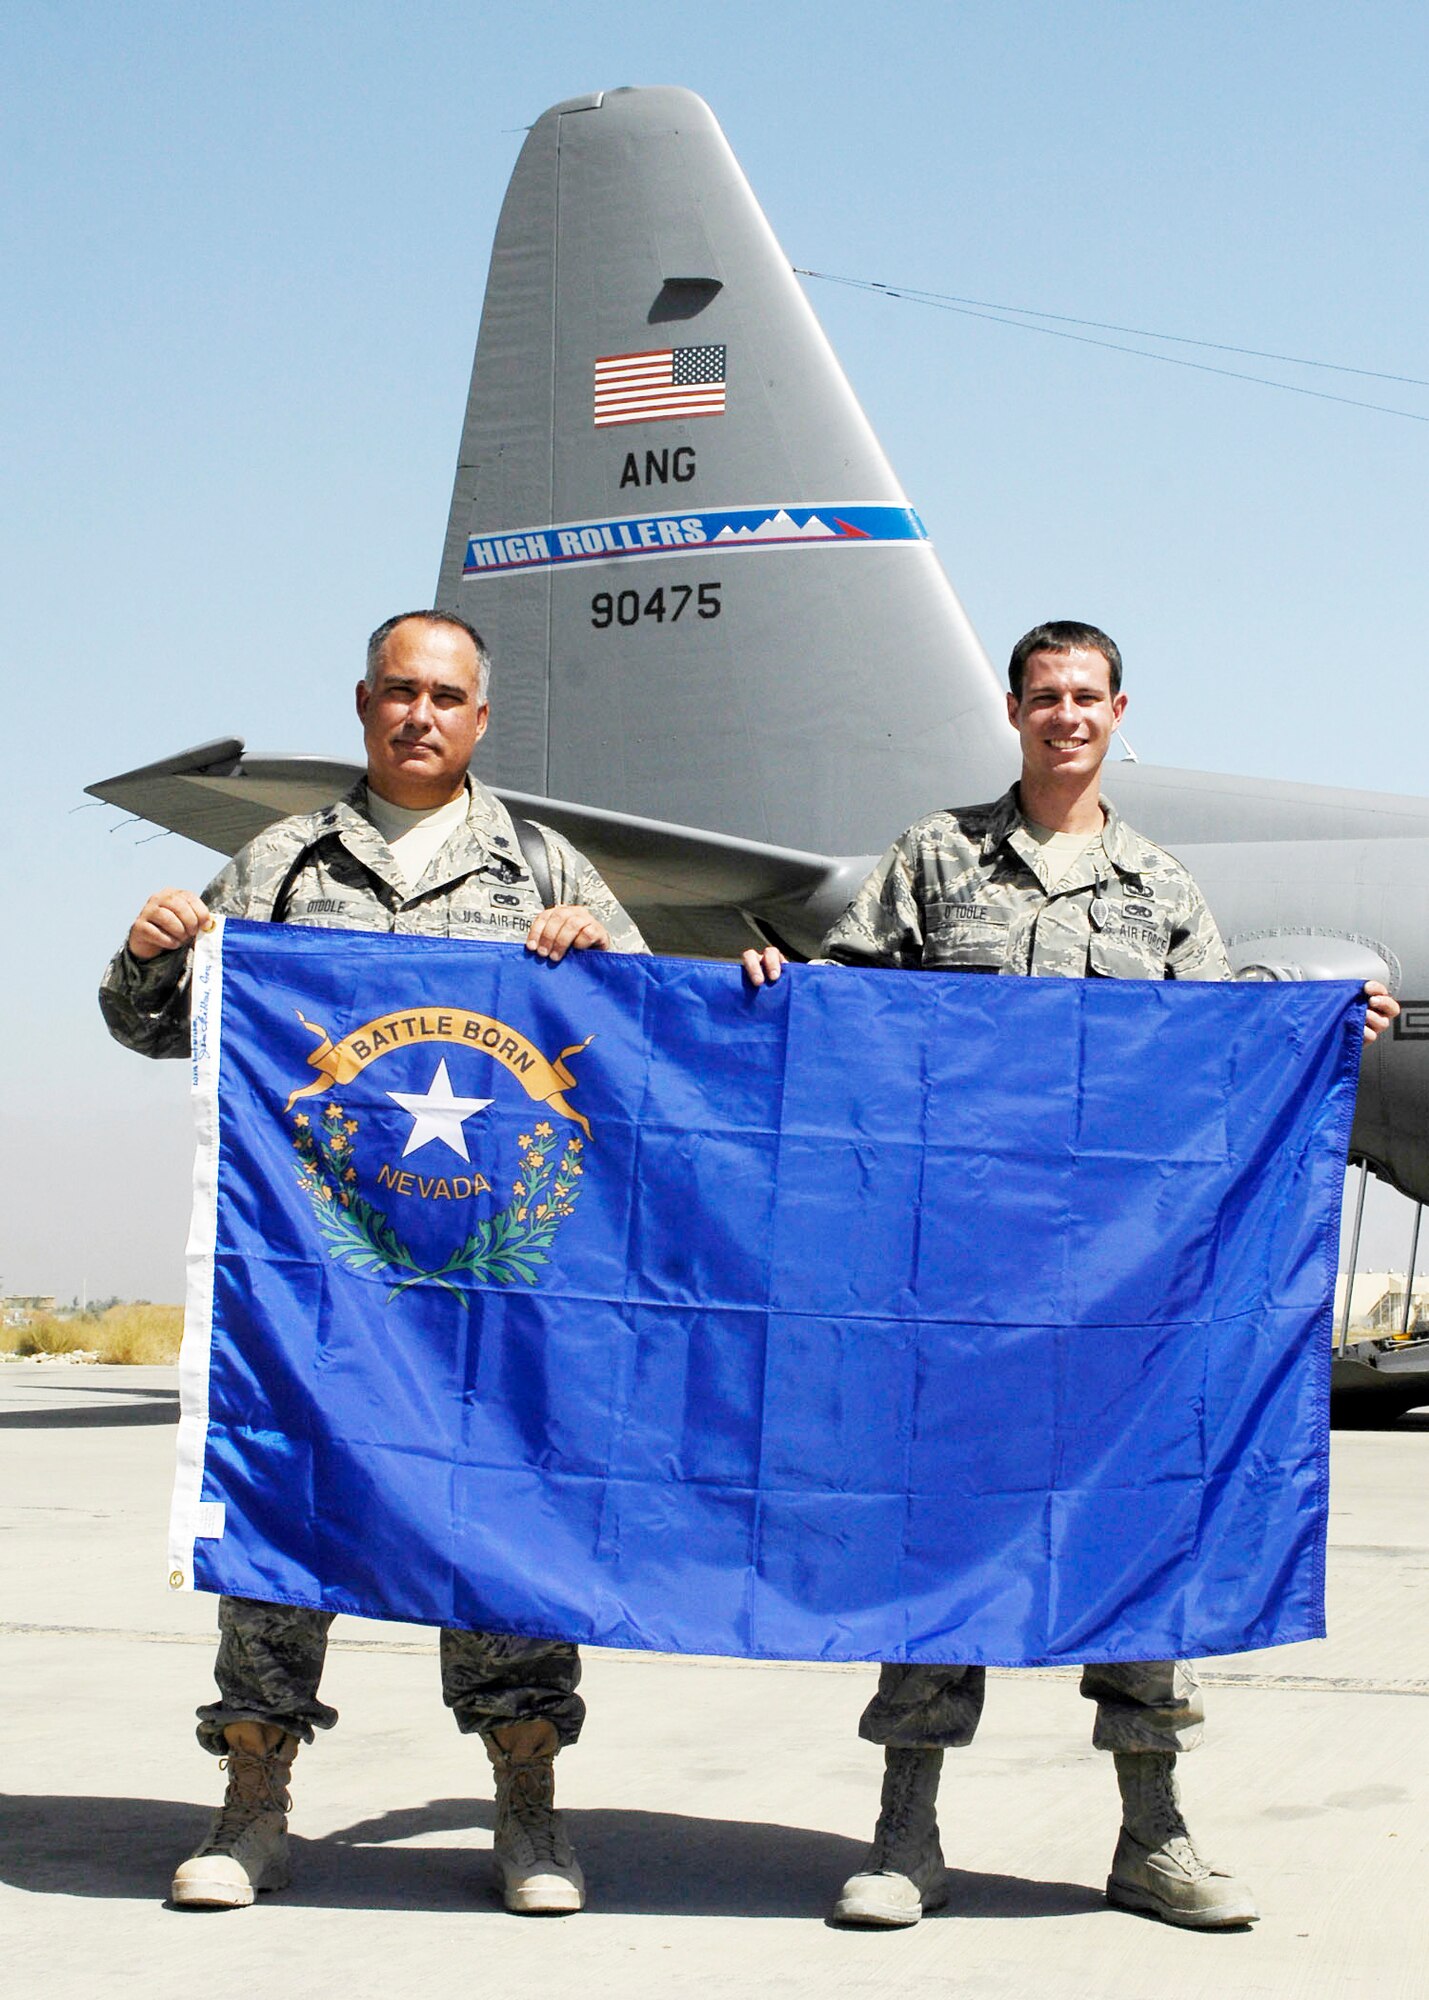 Lt. Col. Barltey O'Toole (left) and his son Senior Airman Bartley O'Toole hold the Nevada state flag Sept. 24, 2009, at Bagram Airfield, Afghanistan. Colonel O'Toole is the 774th Expeditionary Airlift Squadron director of operations and Airman O'Toole is a 774th EAS aircrew flight equipment journeyman. (U.S. Air Force photo/Senior Airman Felicia Juenke)